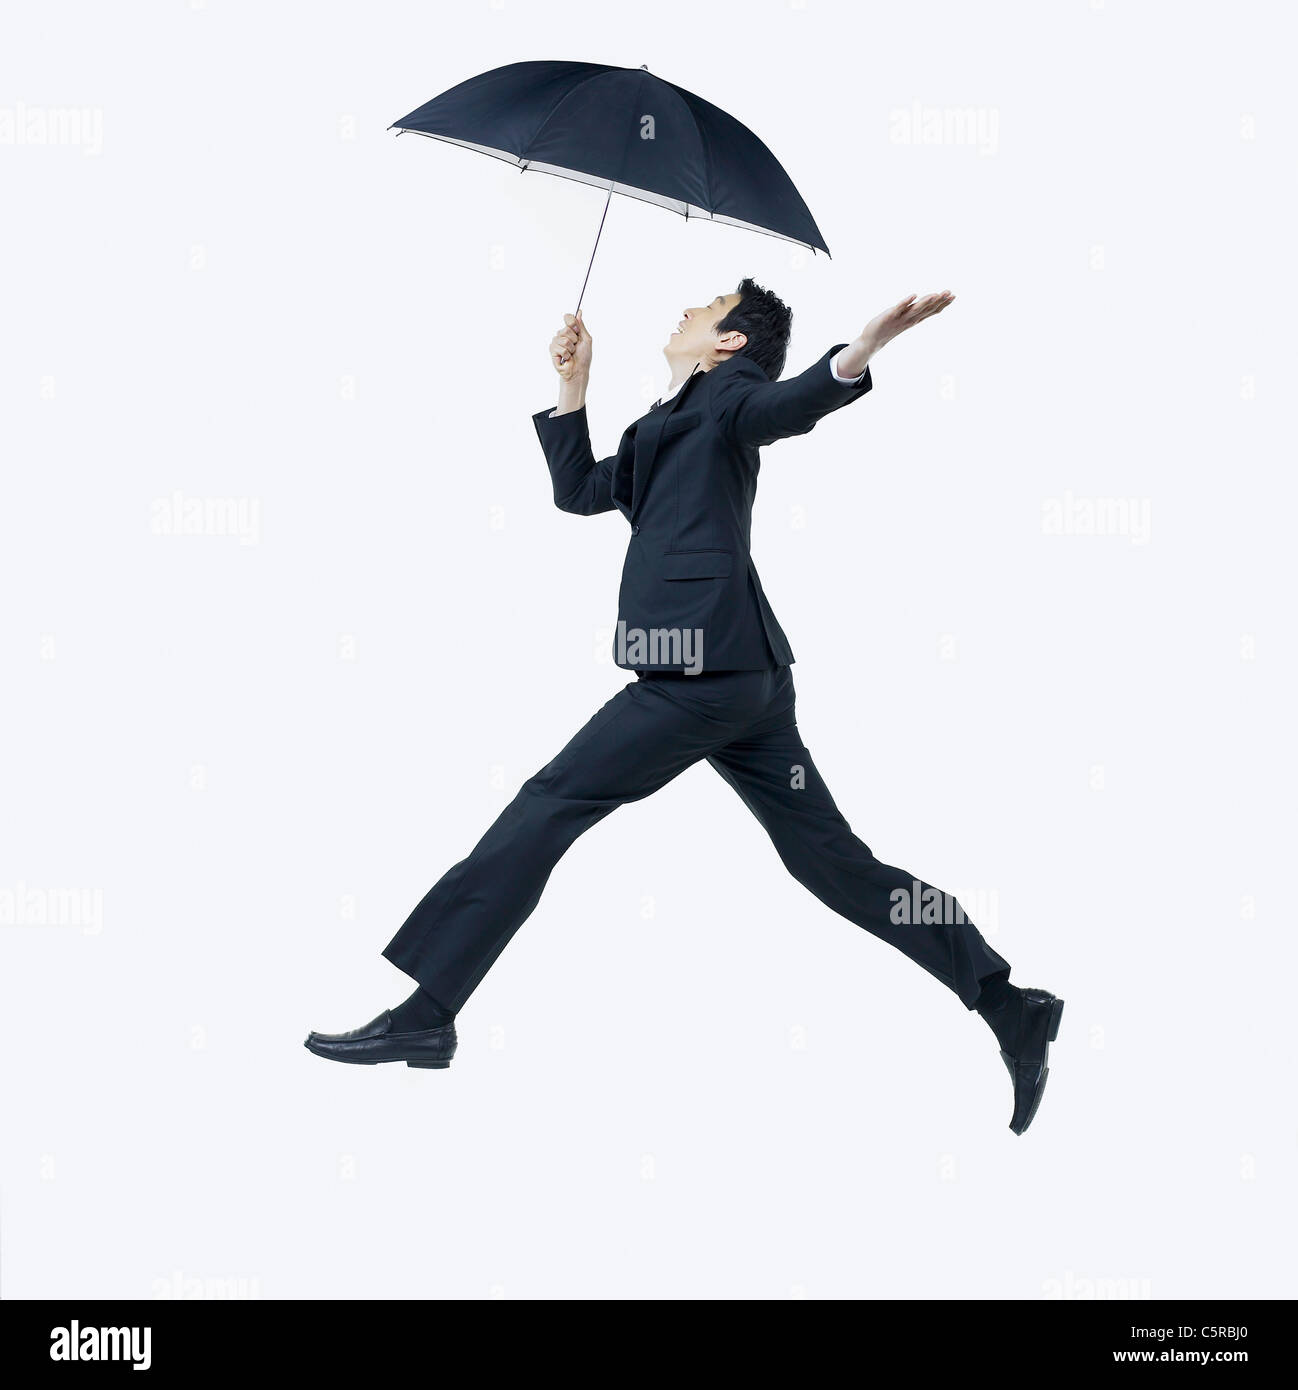 A man holding an umbrella and jumping Stock Photo